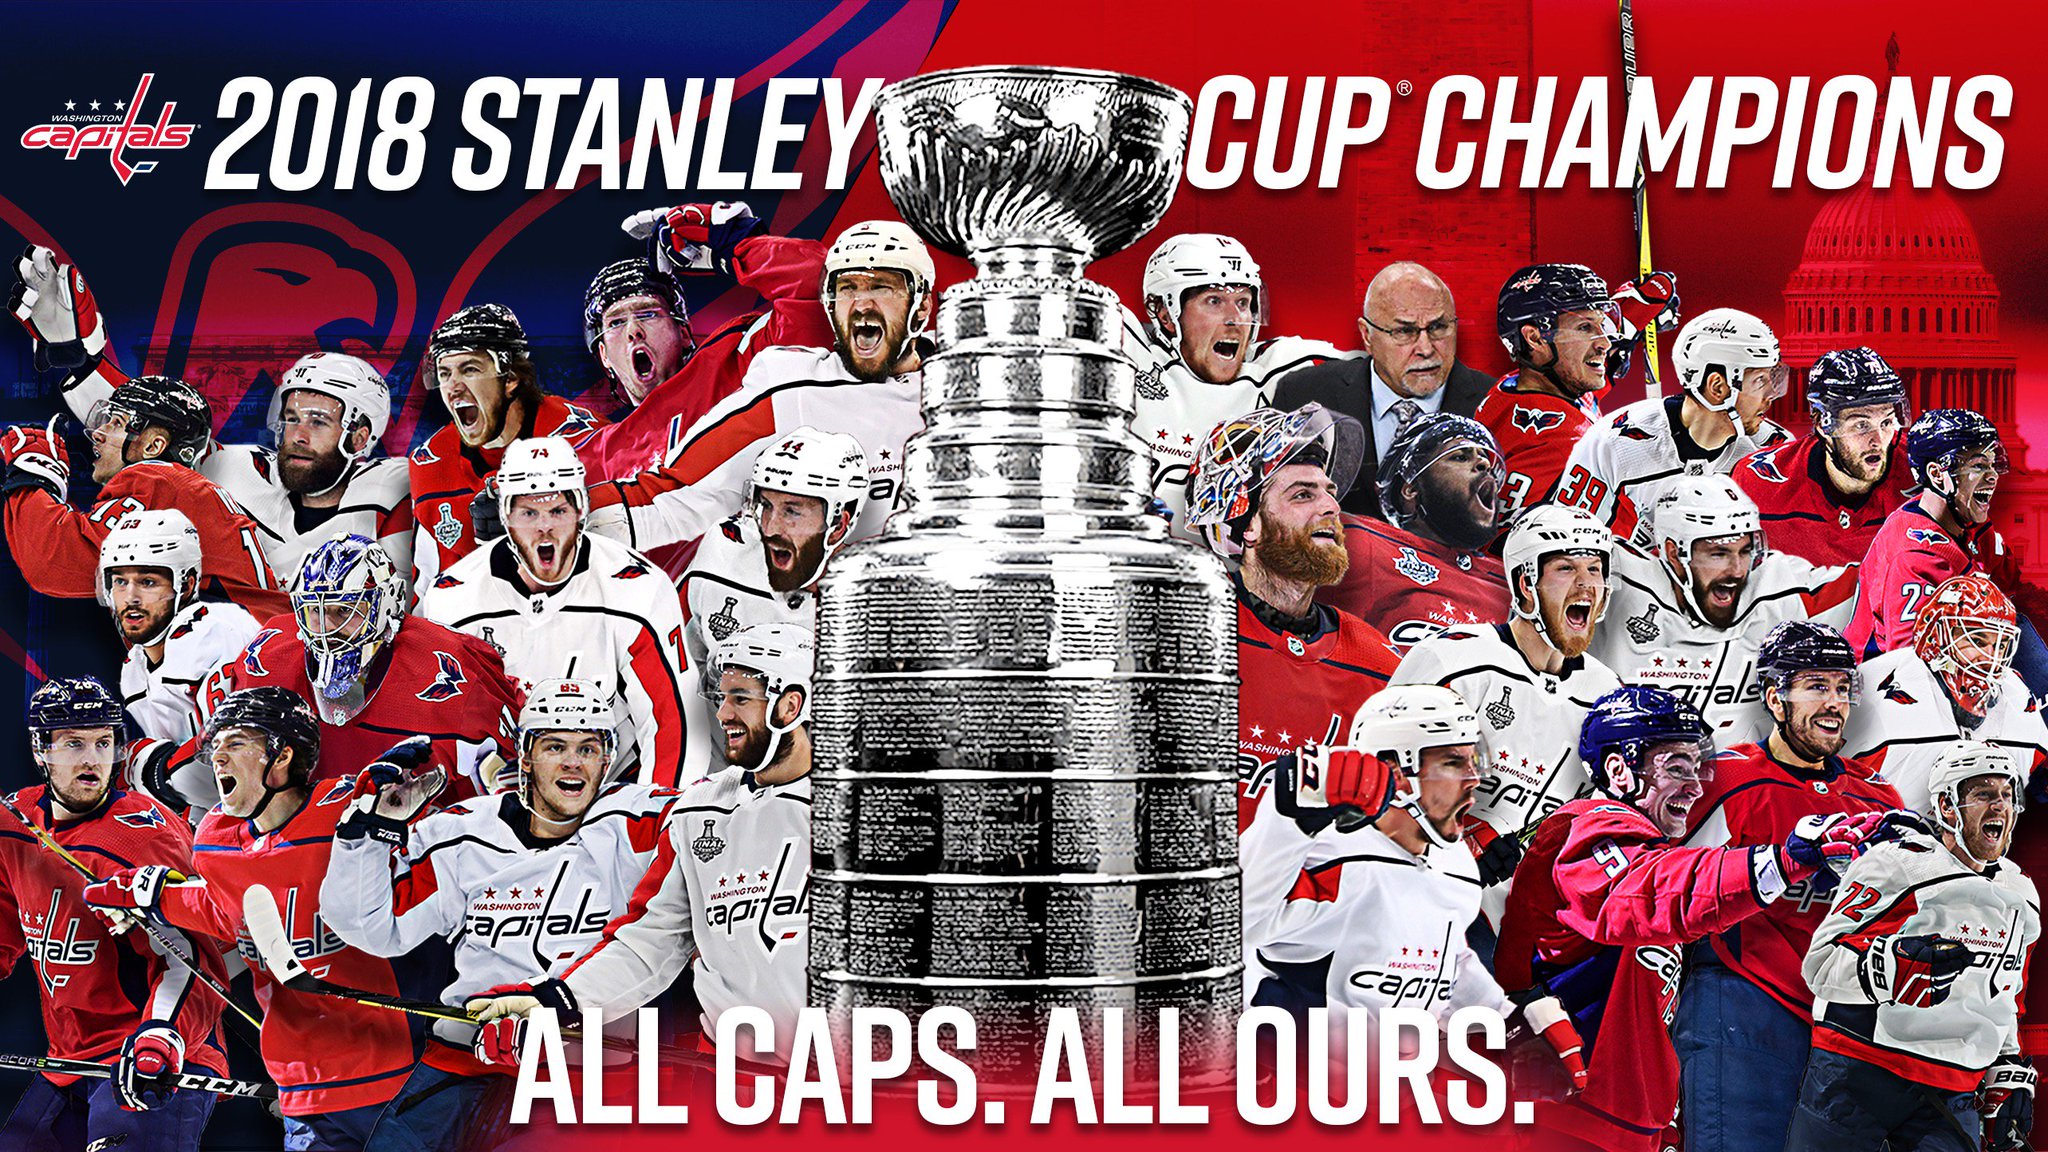 Washington Capitals - Every 2018 Playoffs Goal (Stanley Cup Champions) 